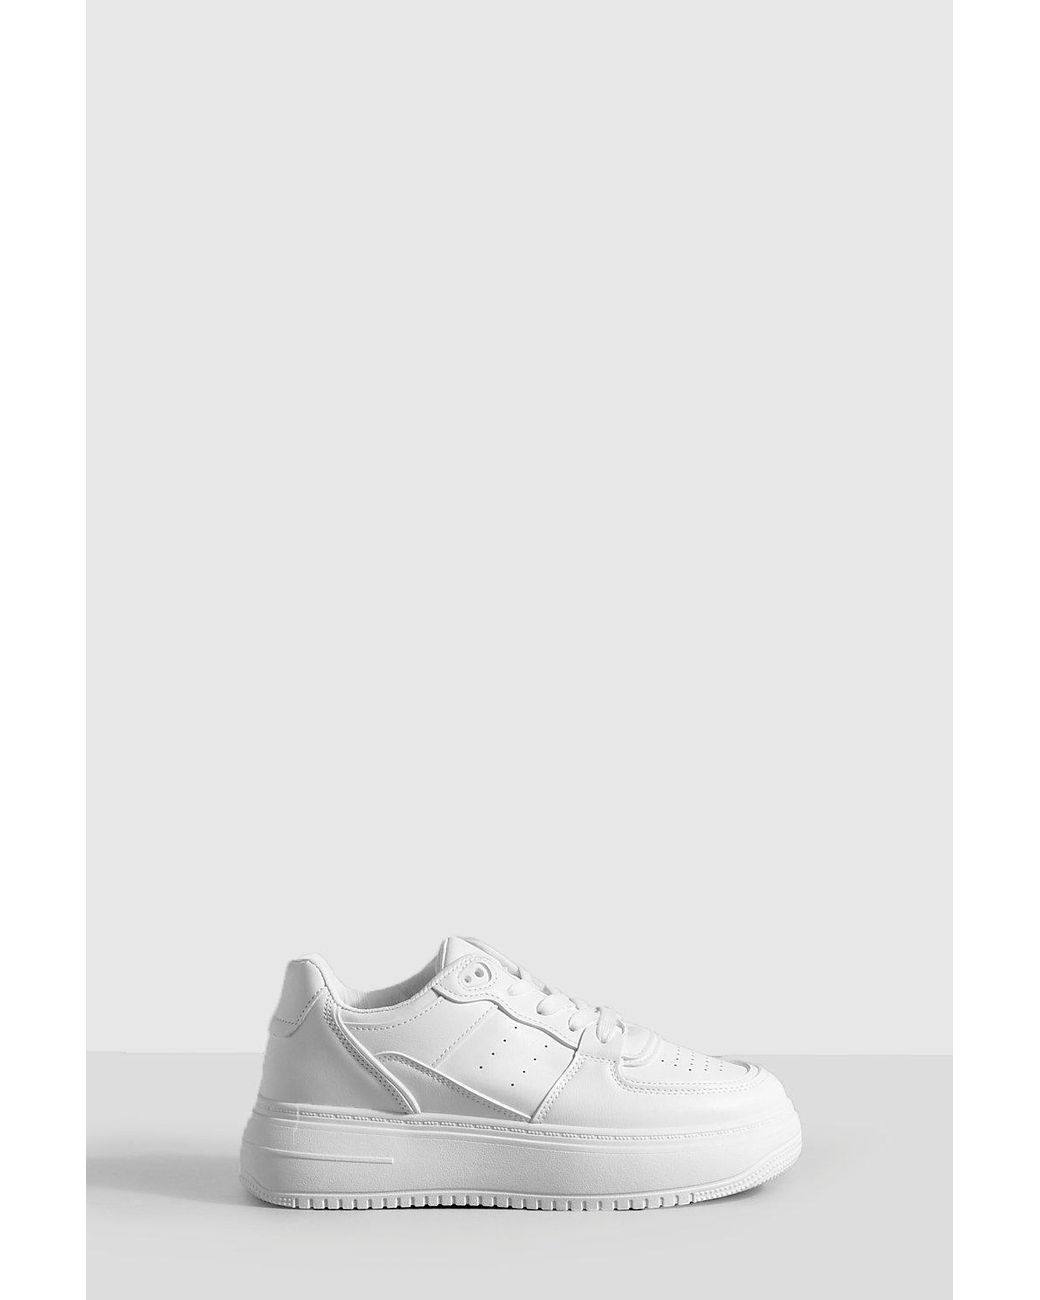 Boohoo Chunky Platform Sneakers in White | Lyst